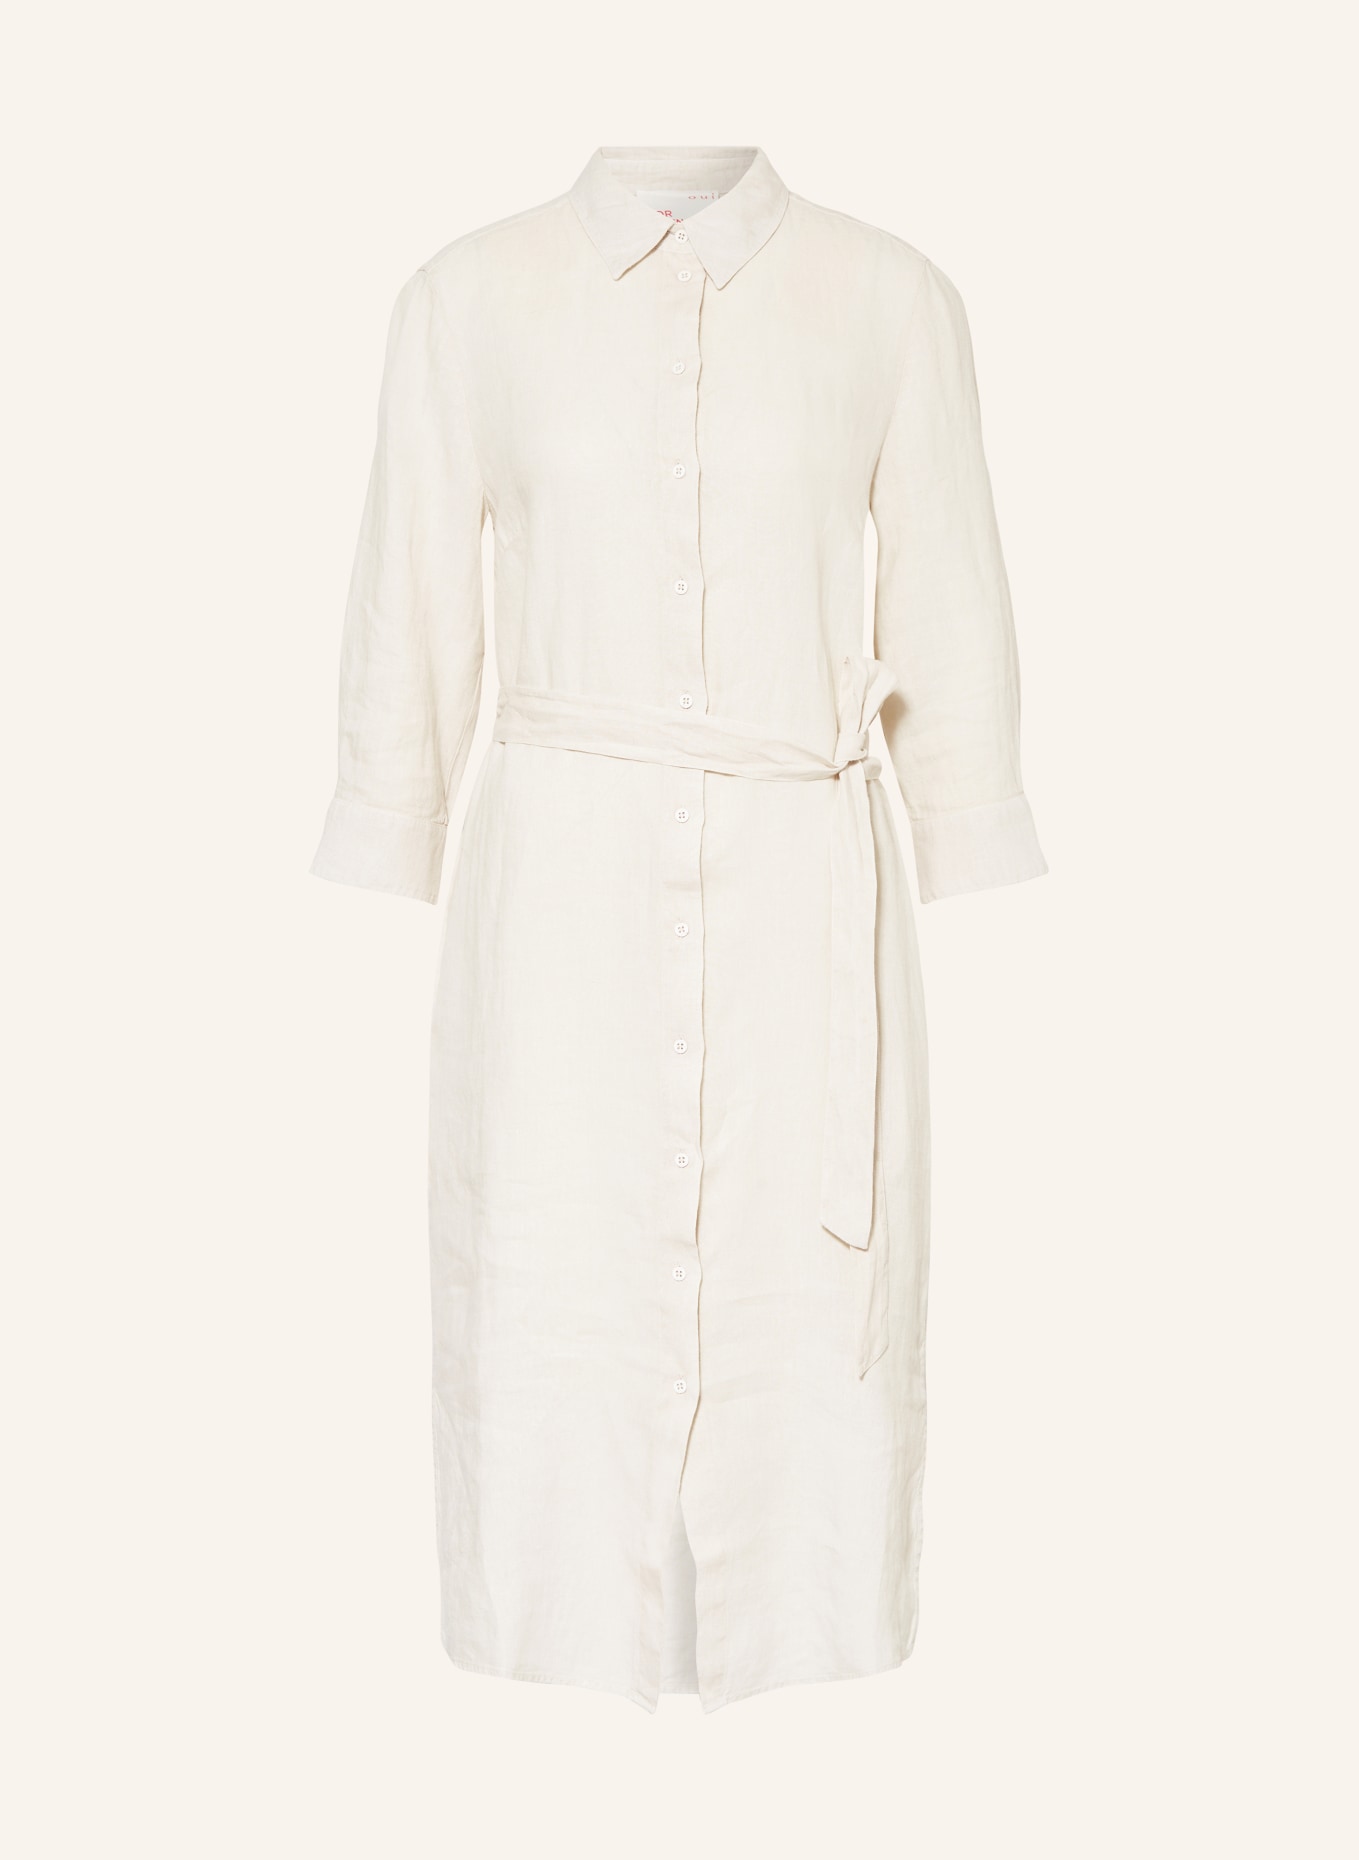 oui Shirt dress made of linen with 3/4 sleeves, Color: CREAM (Image 1)